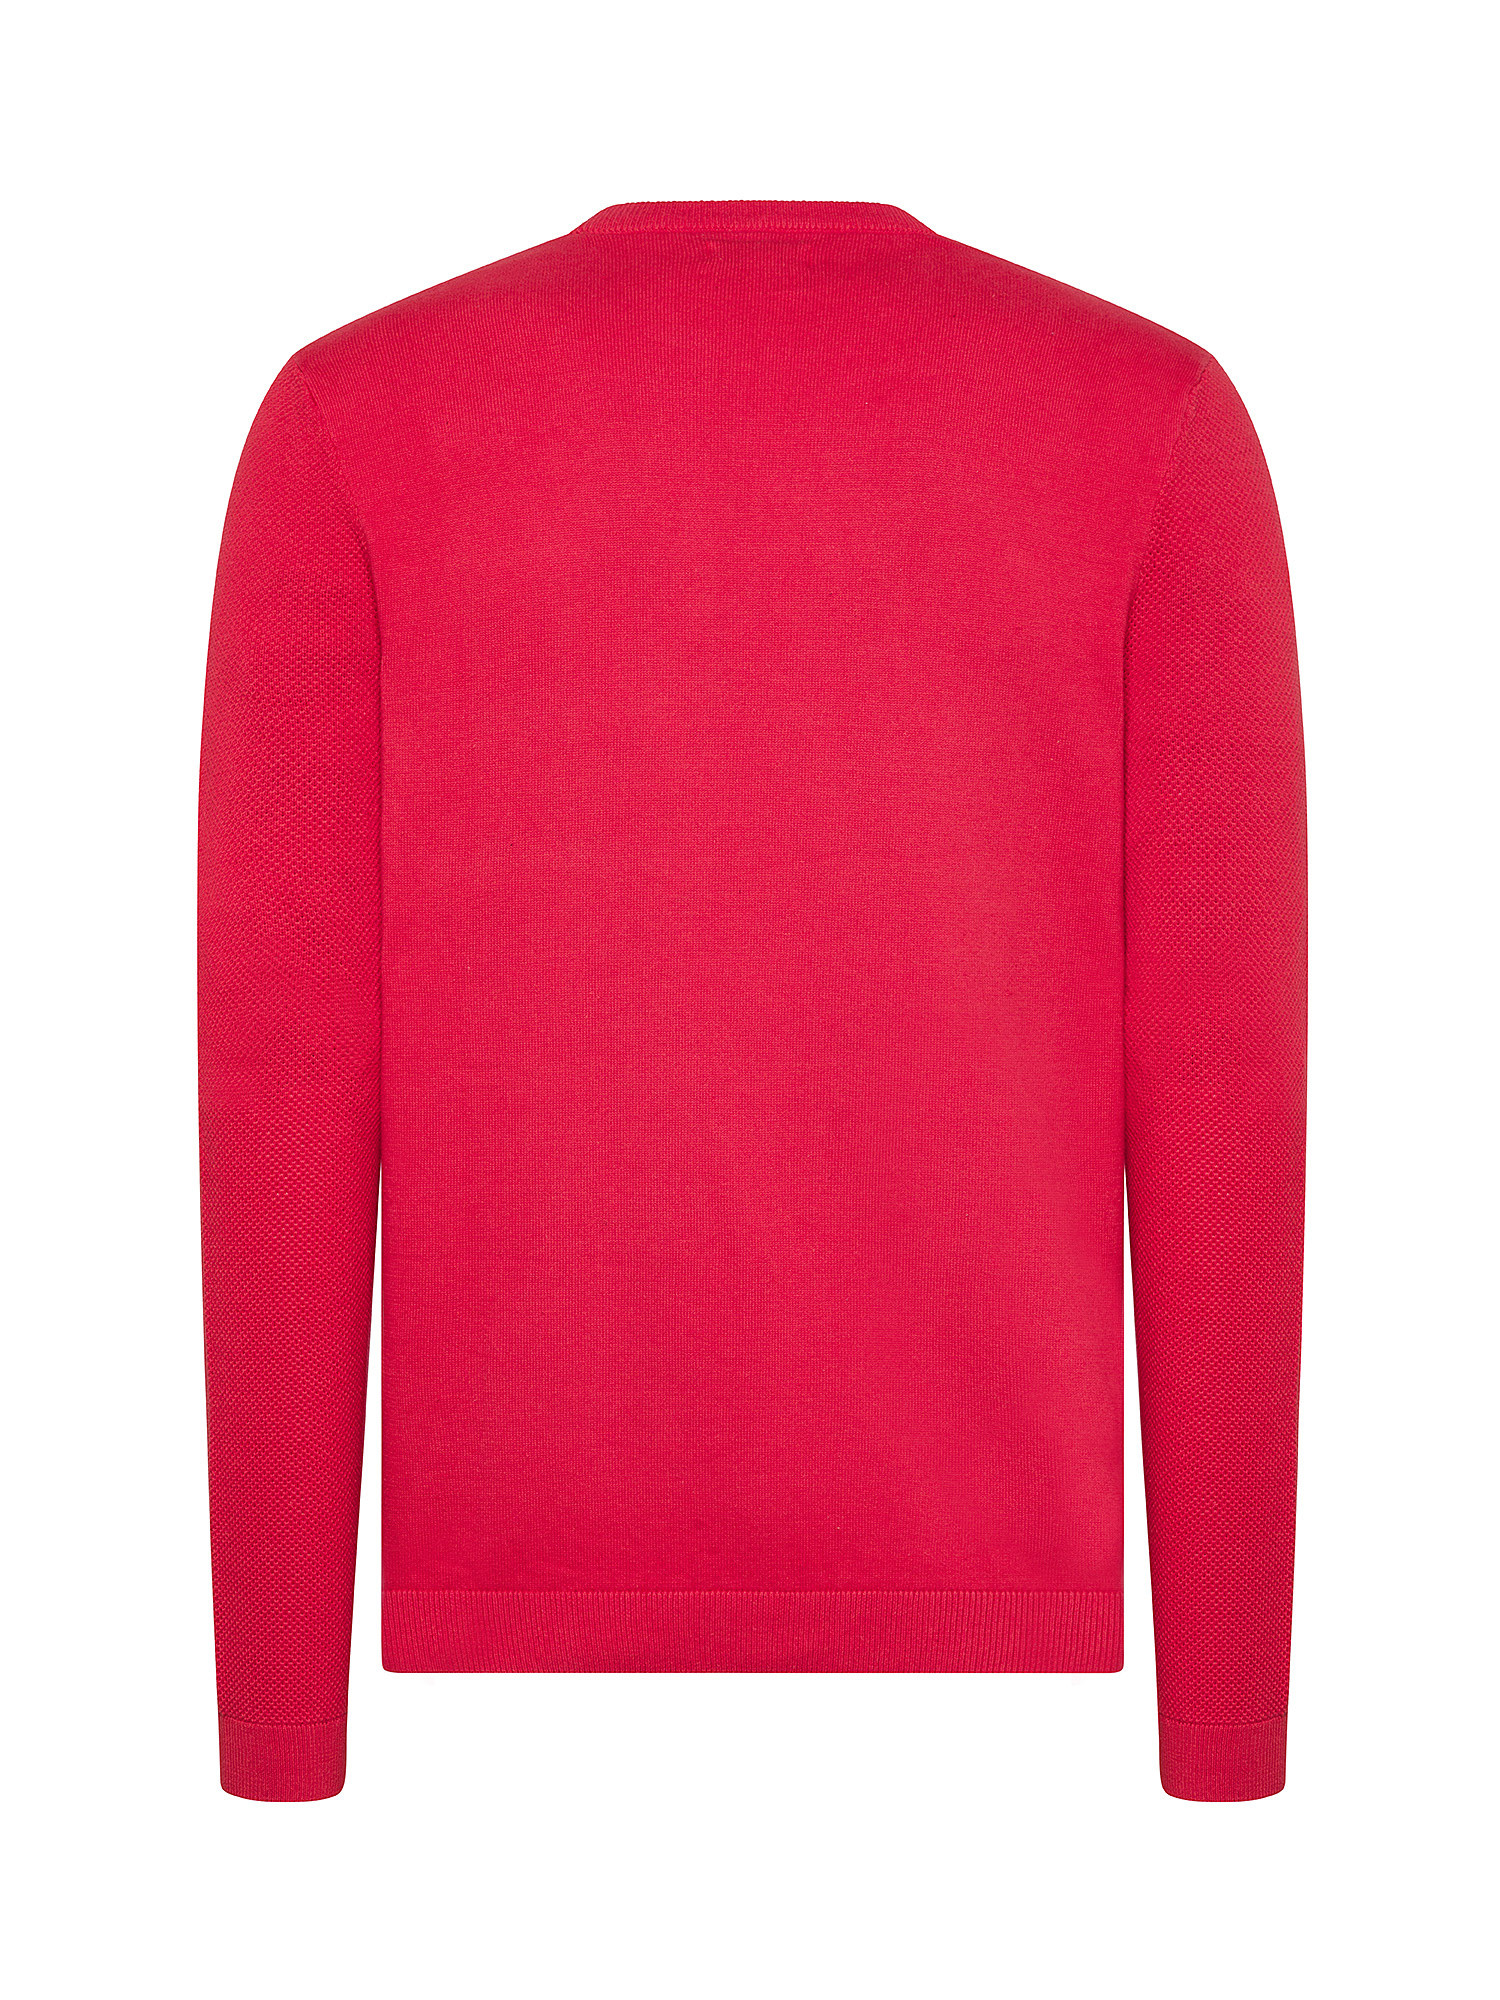 Luca D'Altieri - Crew neck sweater in pure cotton, Red, large image number 1